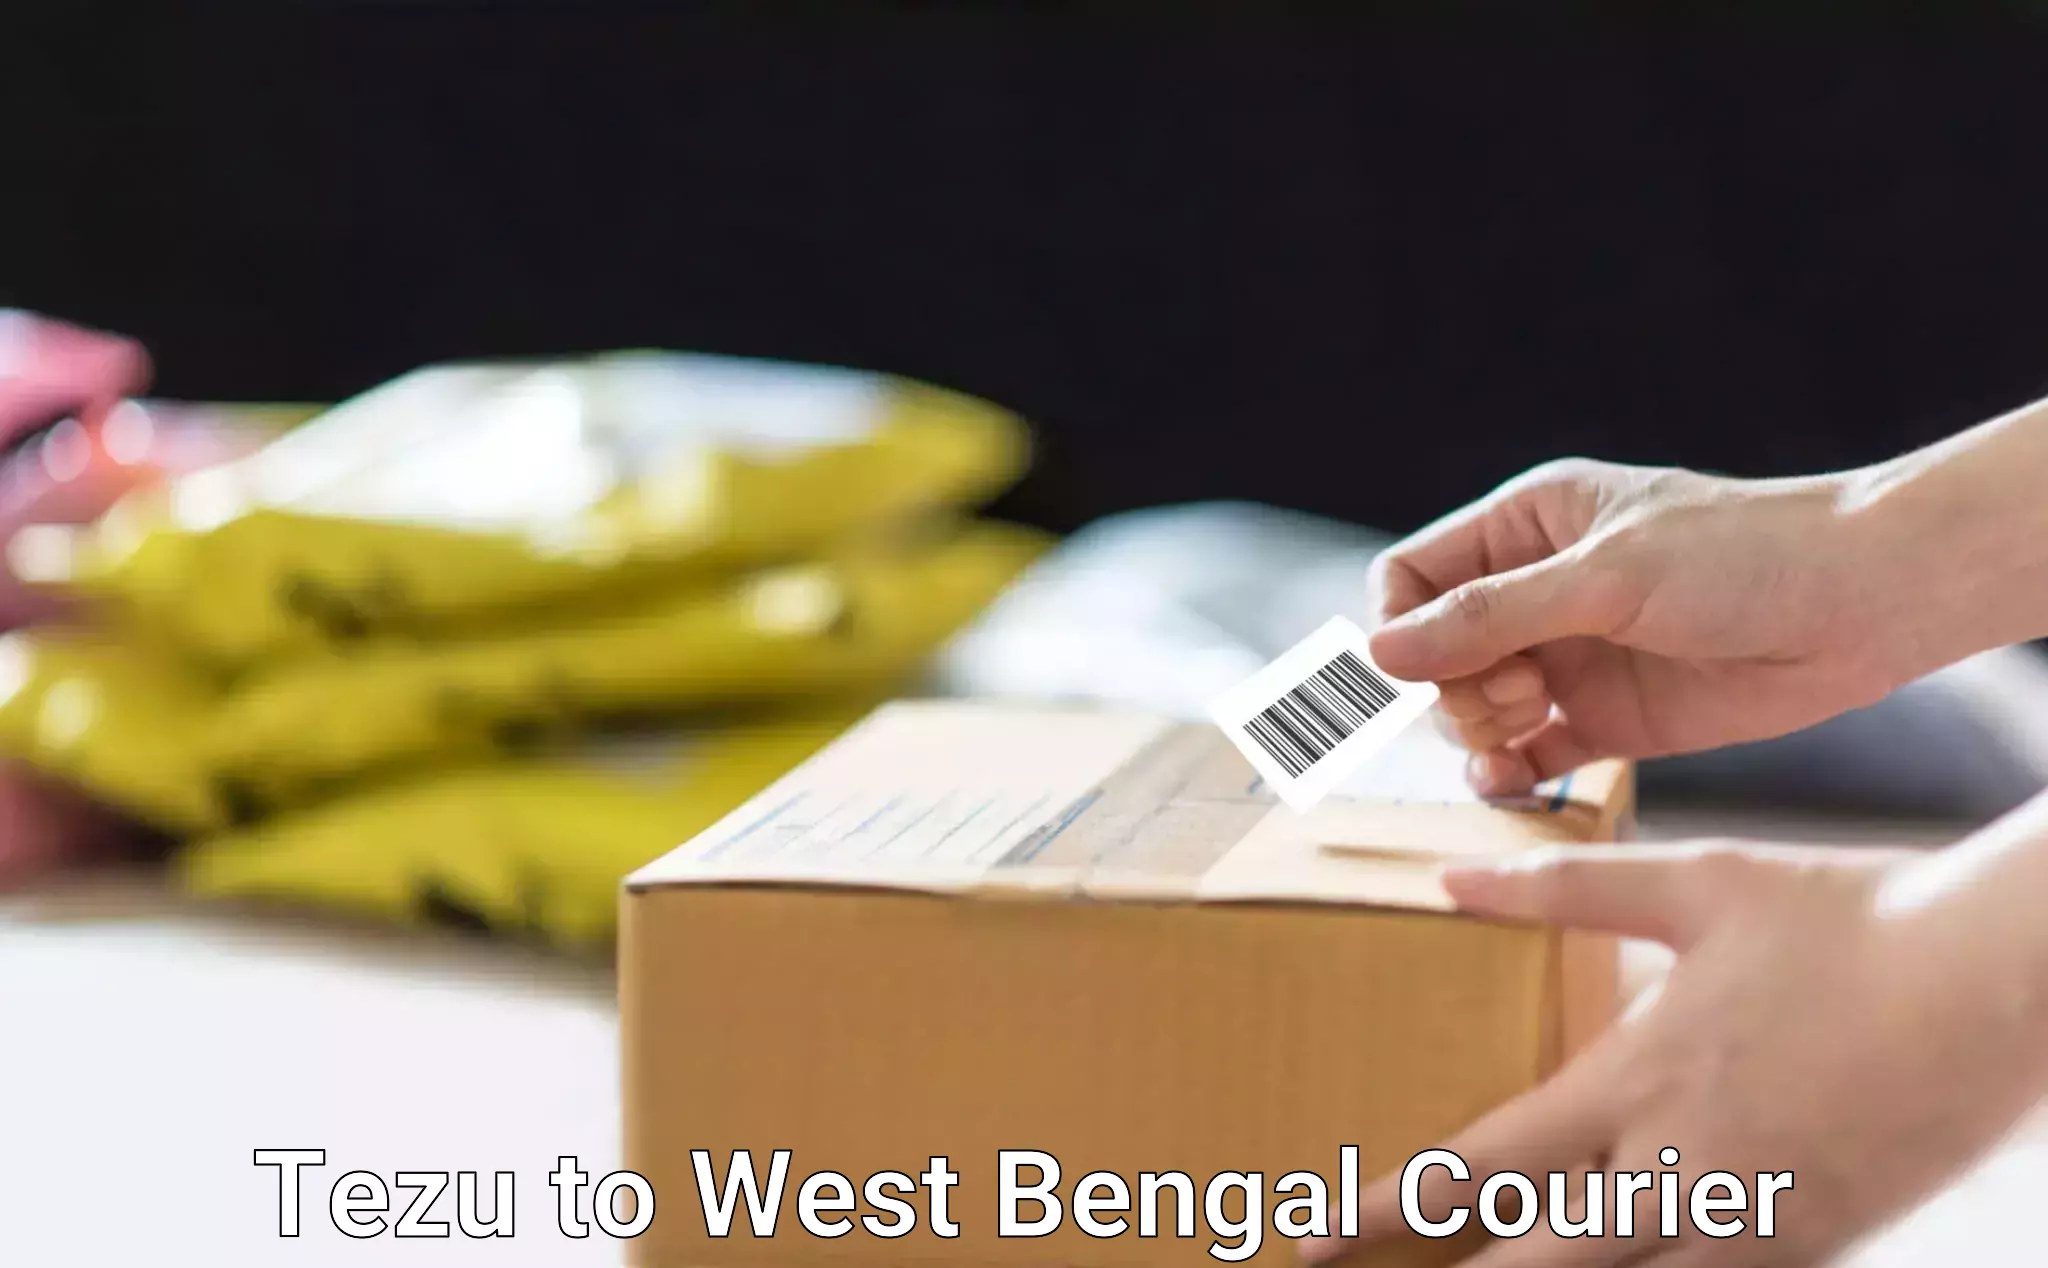 Easy access courier services in Tezu to West Bengal